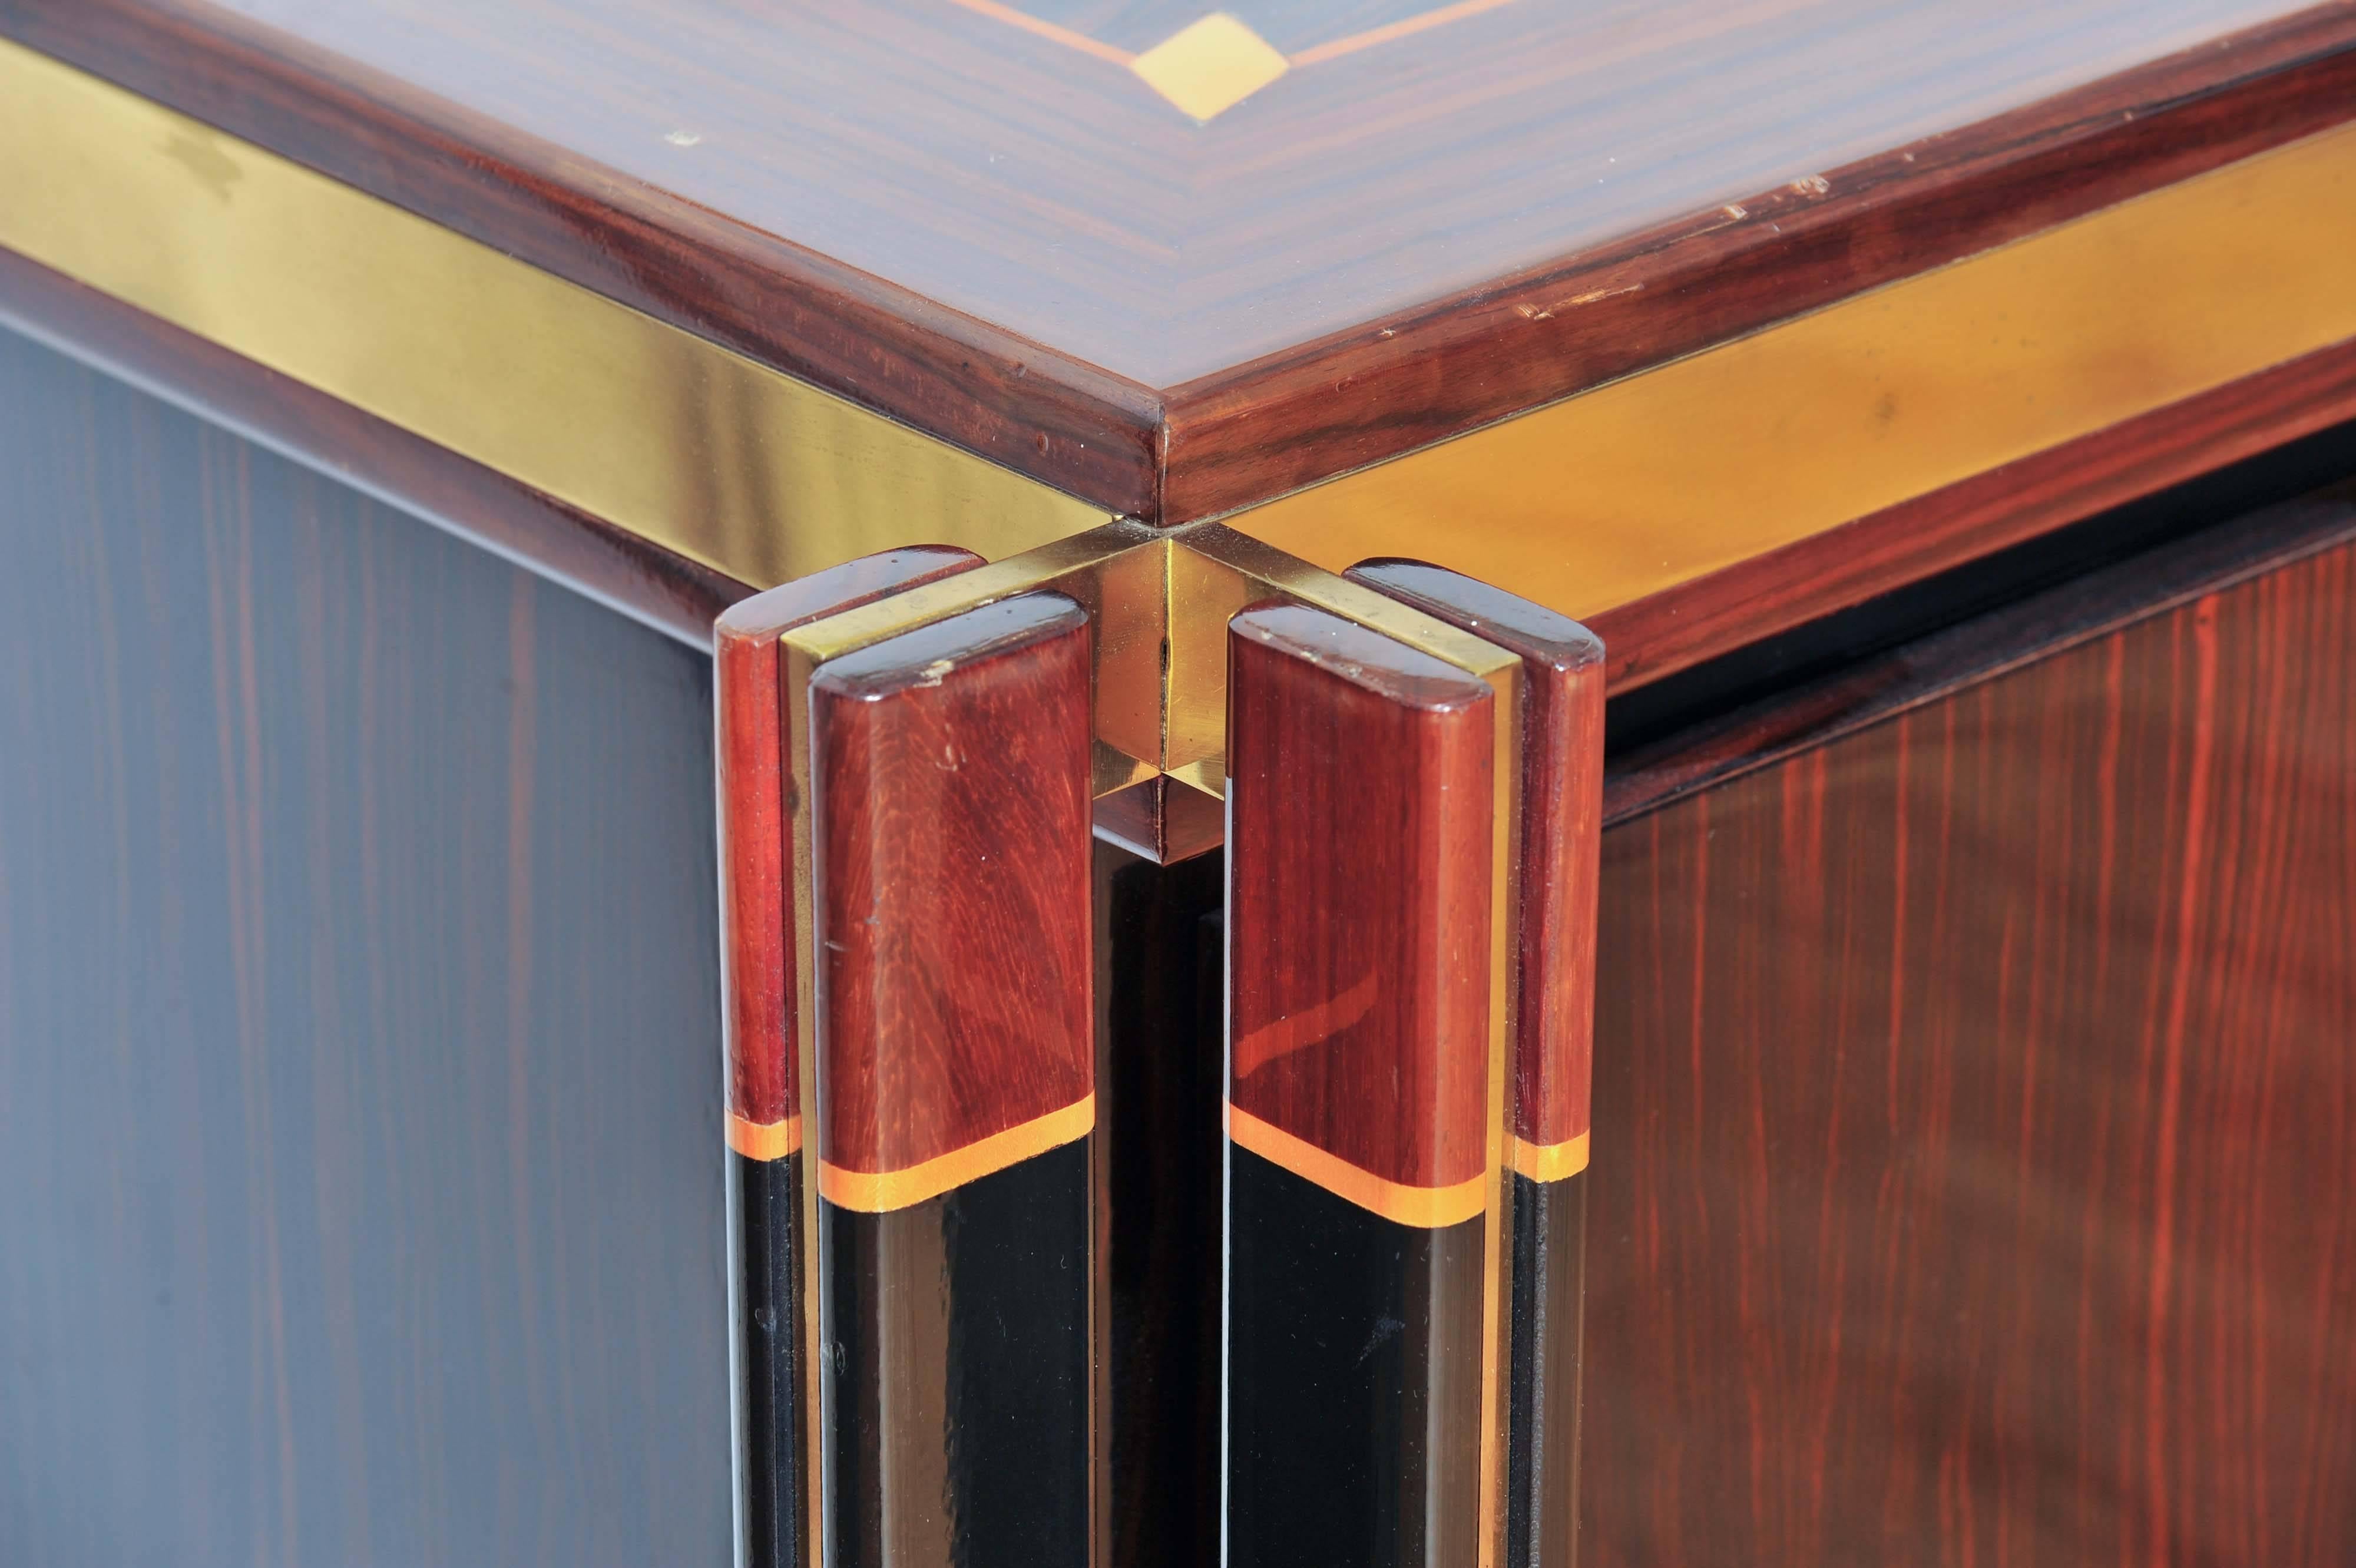 Madagascar wood sideboard is decorated with contrasting veneers and light fruit wood inlays and brass lines. The credenza is edged with brass borders, emphasizing its geometric lines with the structure in wood and brass in the four corners. Four